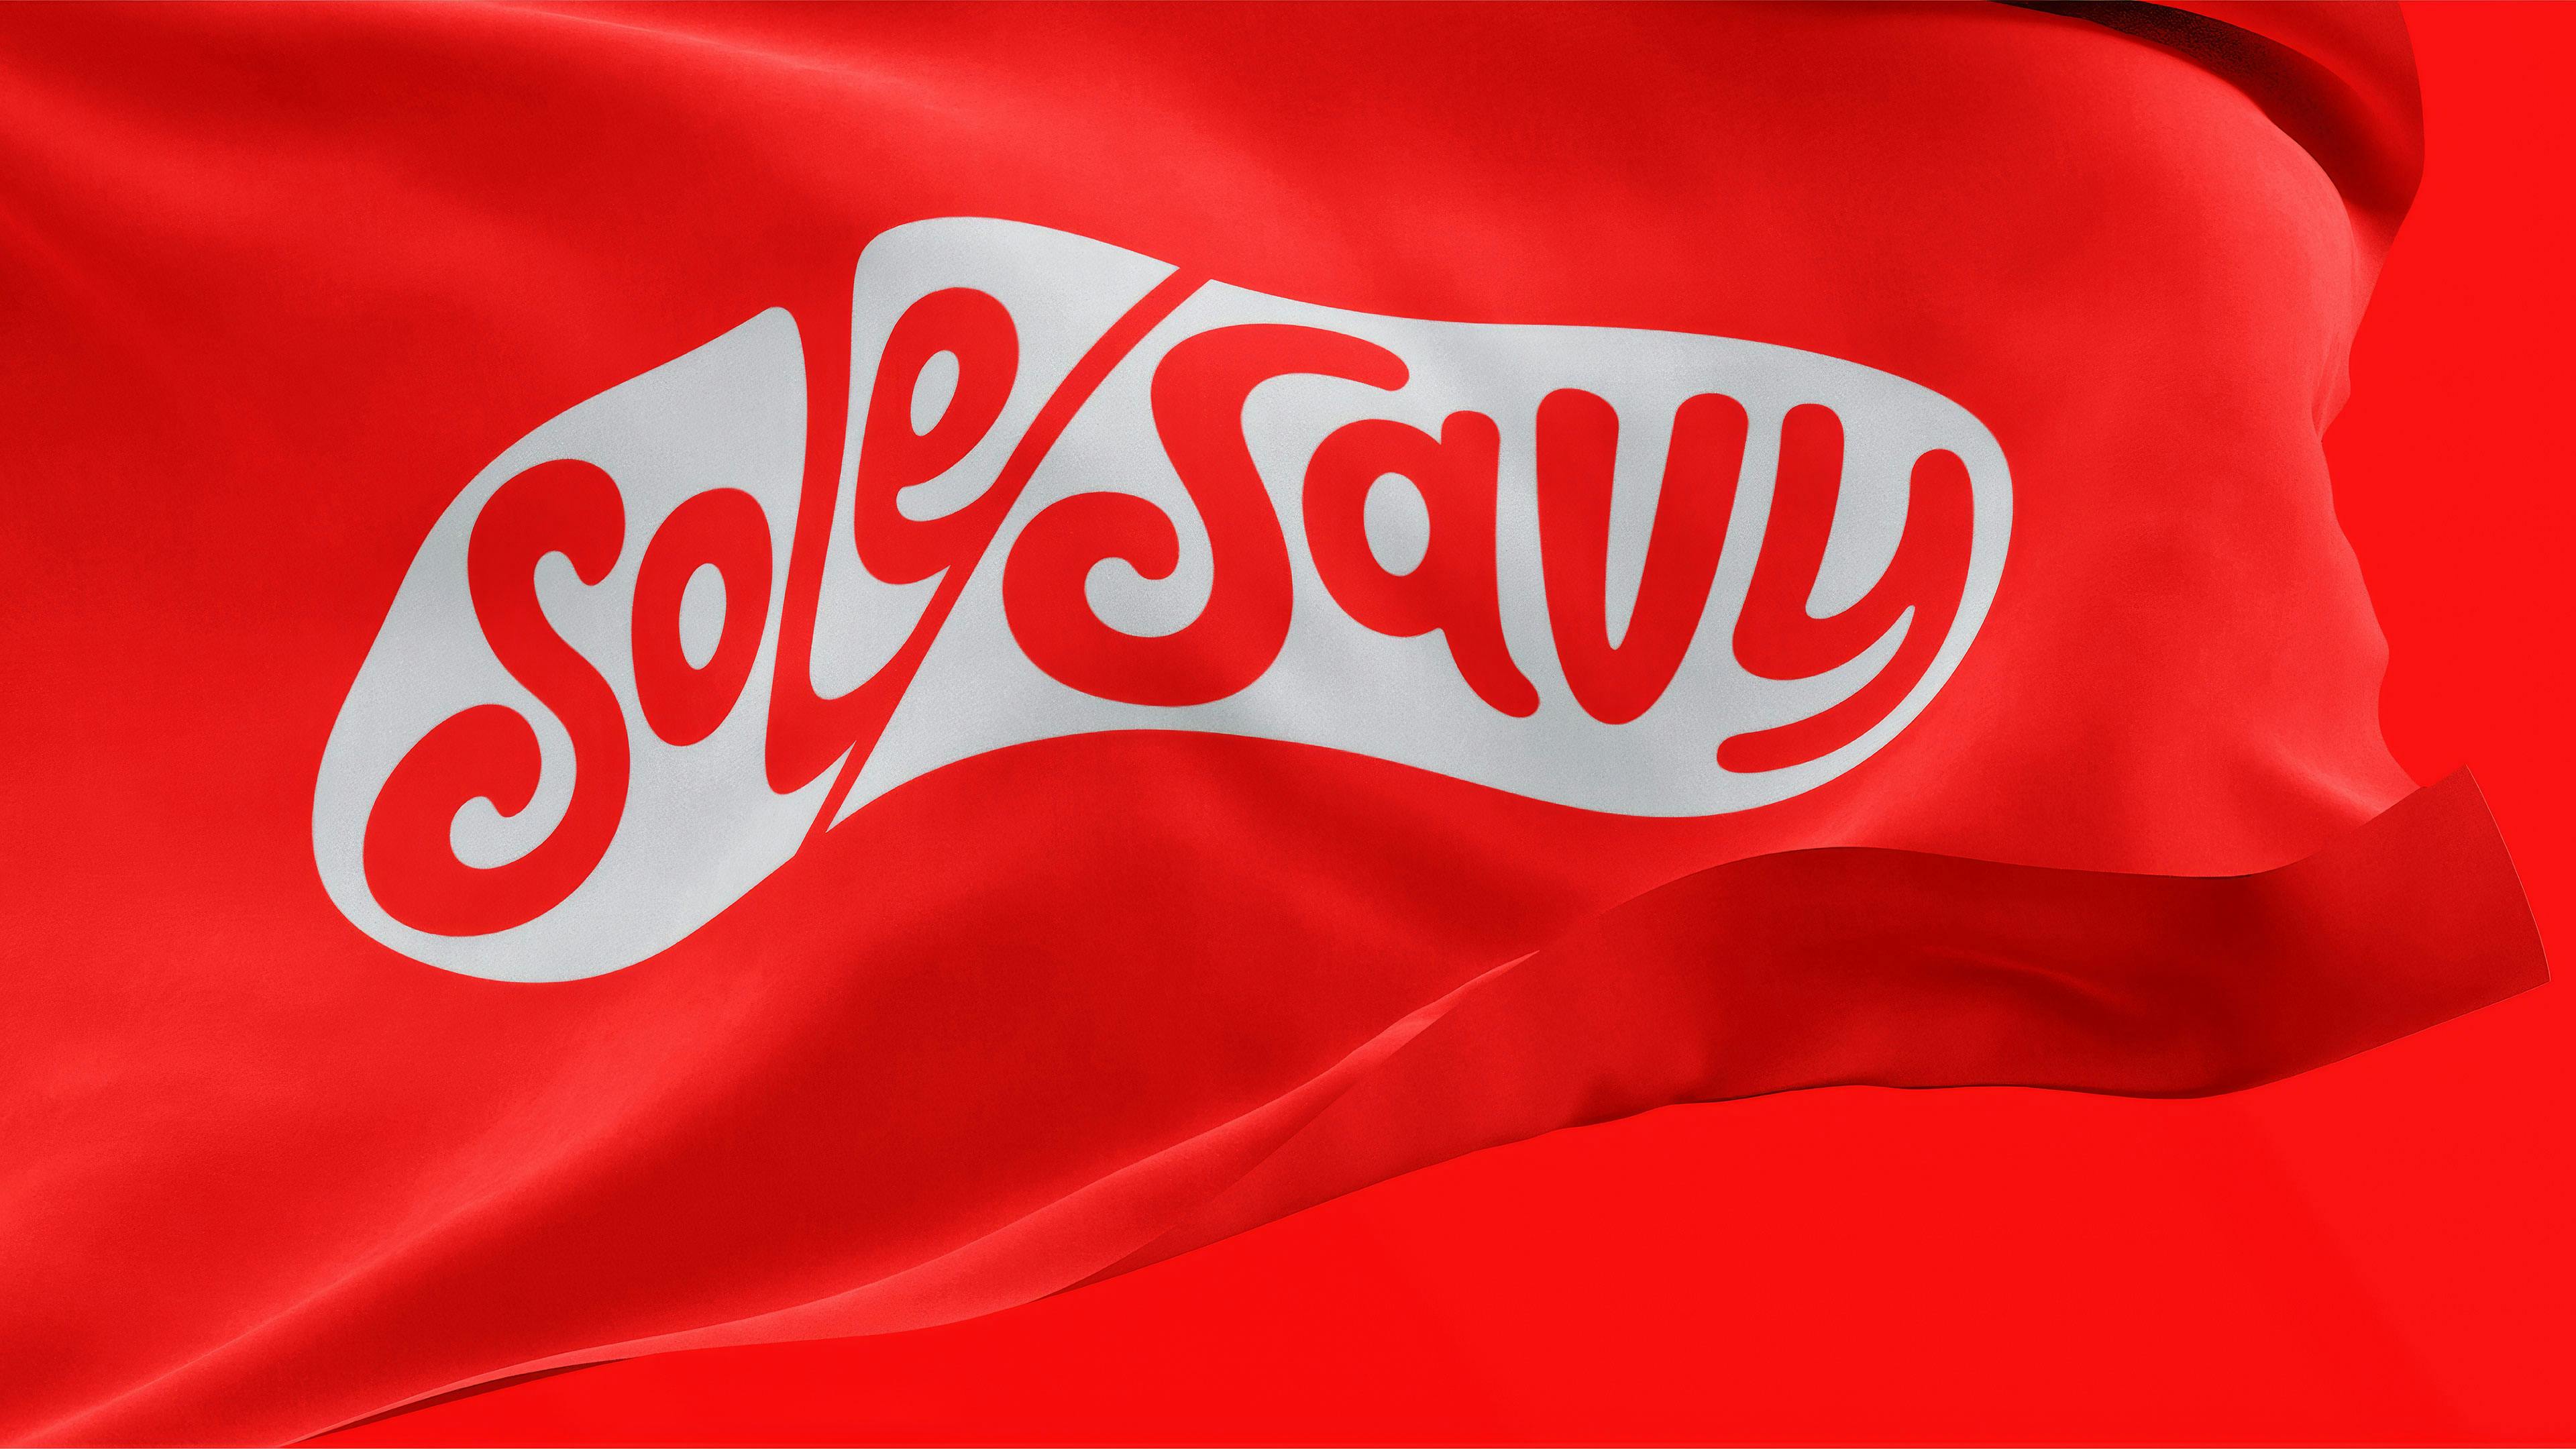 SoleSavy—A vibrant brand bringing sneaker culture to the people.